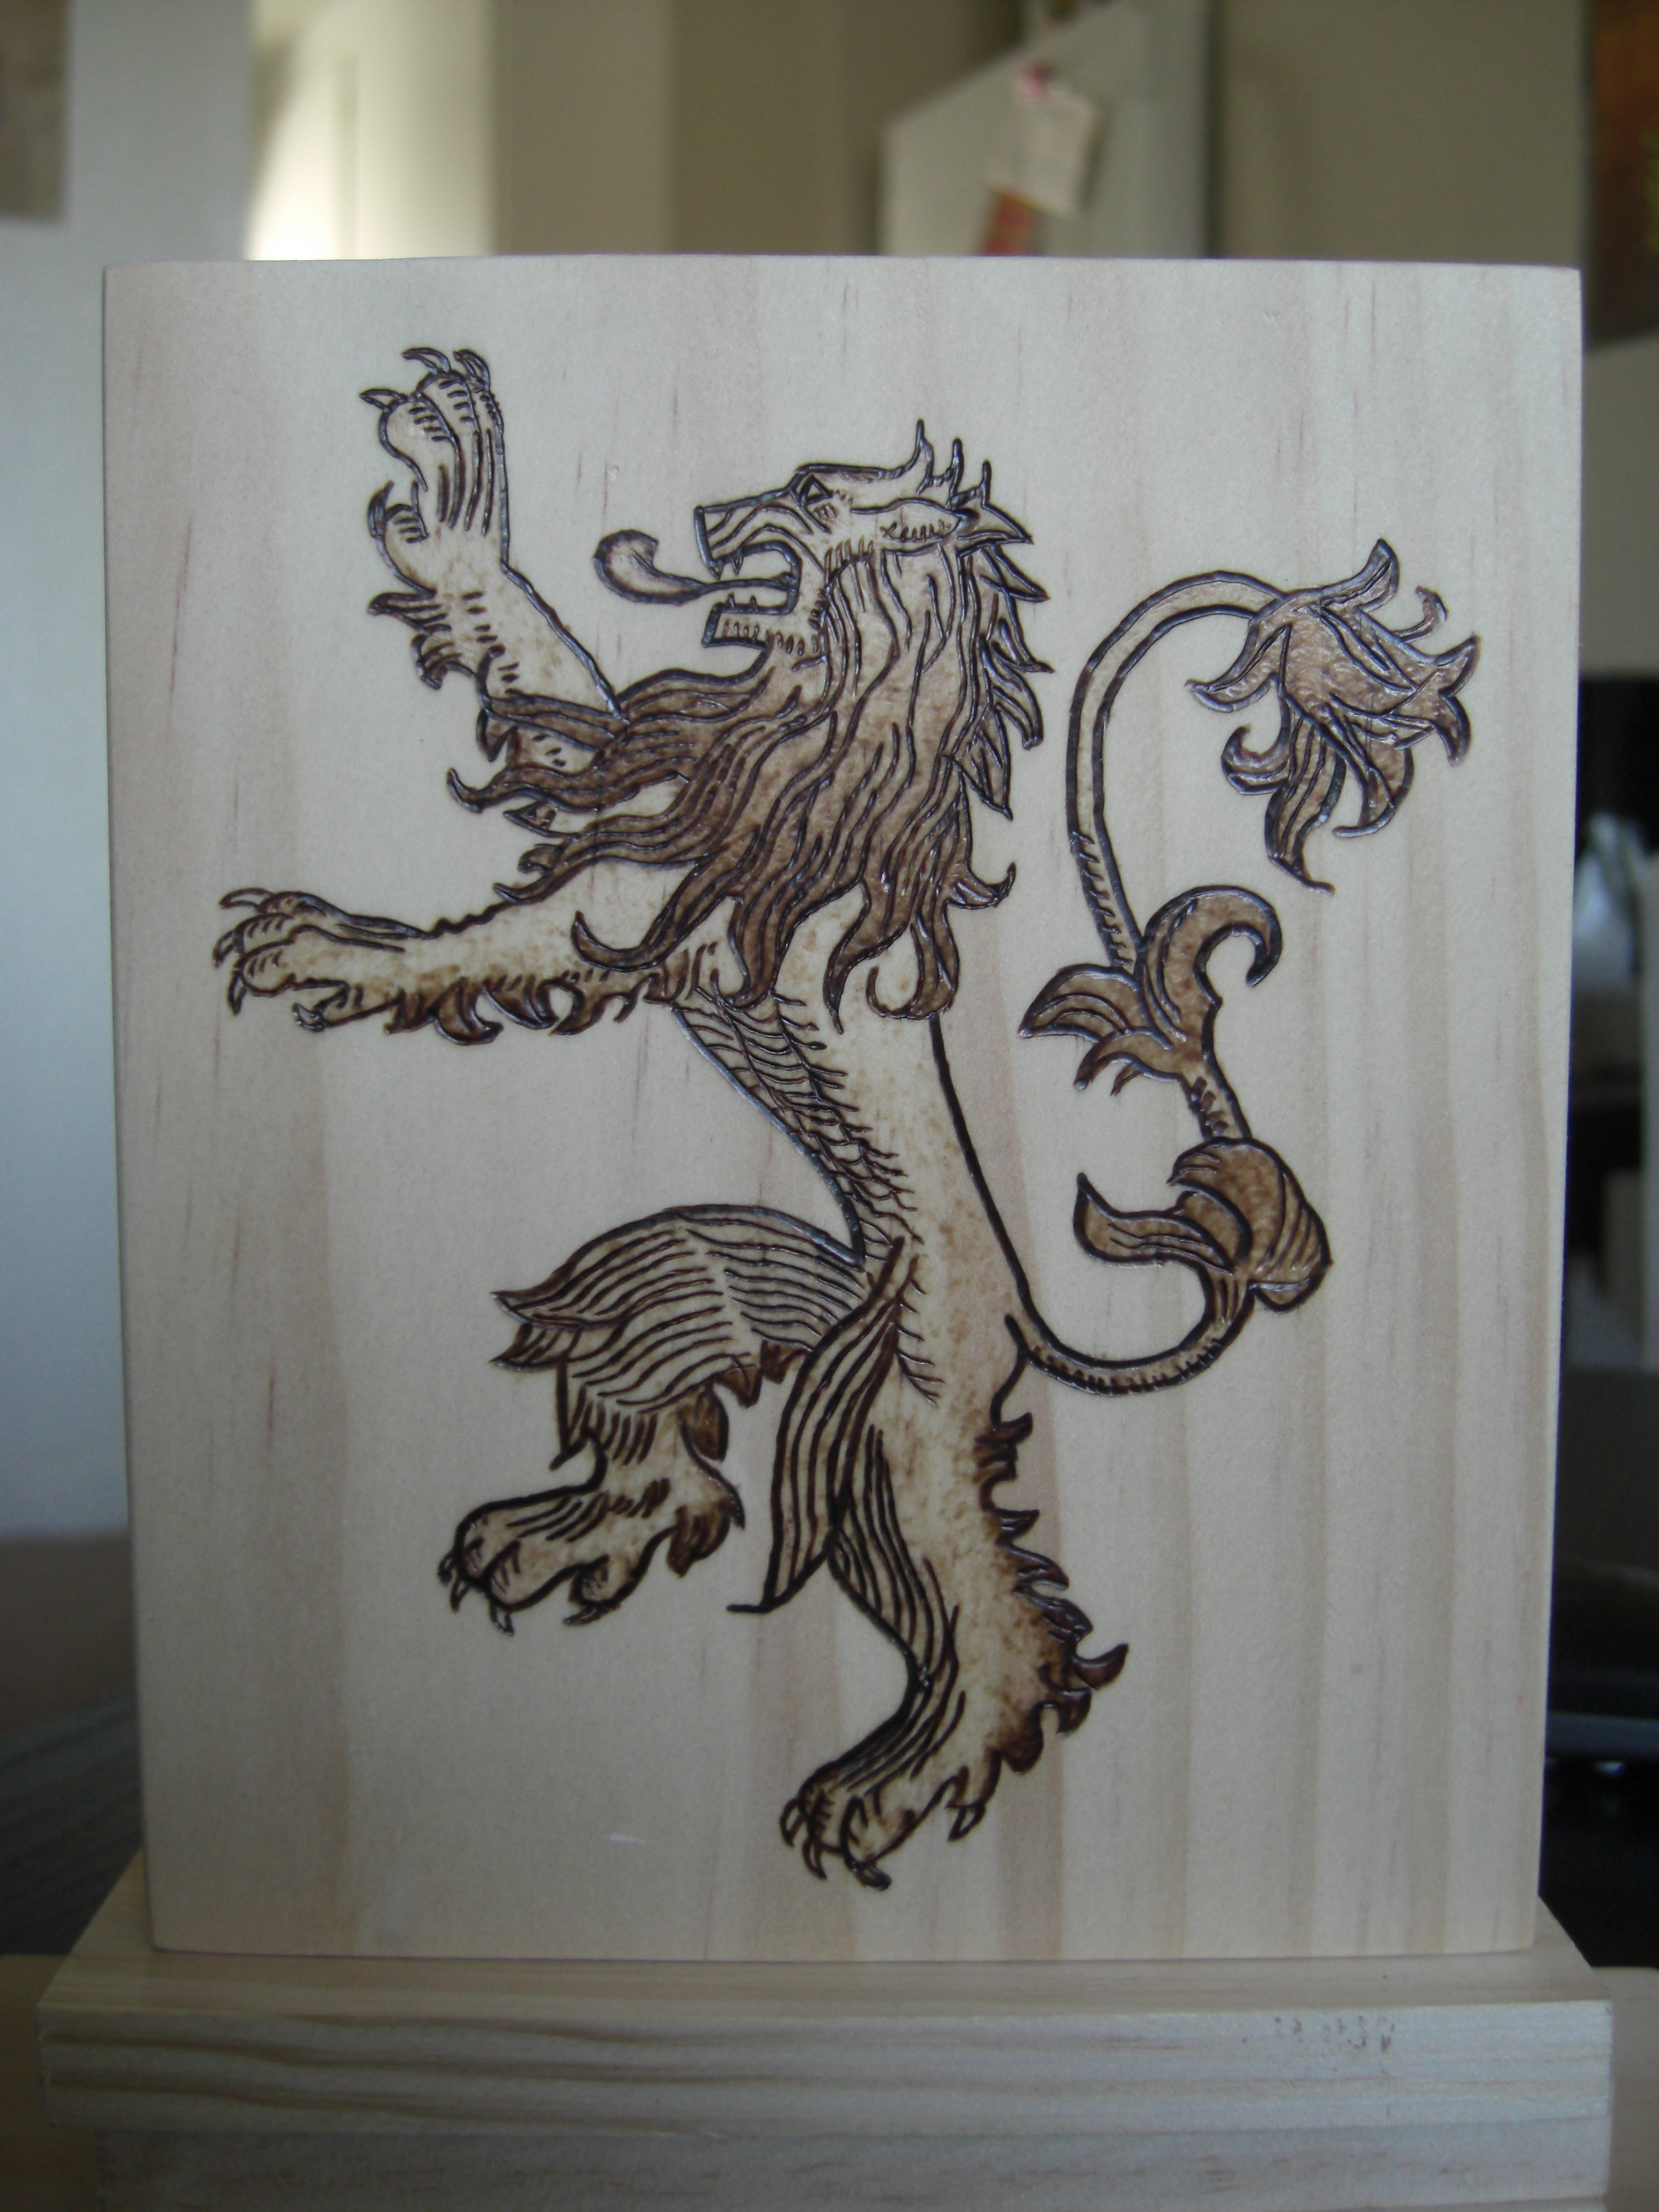 Pyrography, or How to Wood-Burn Art